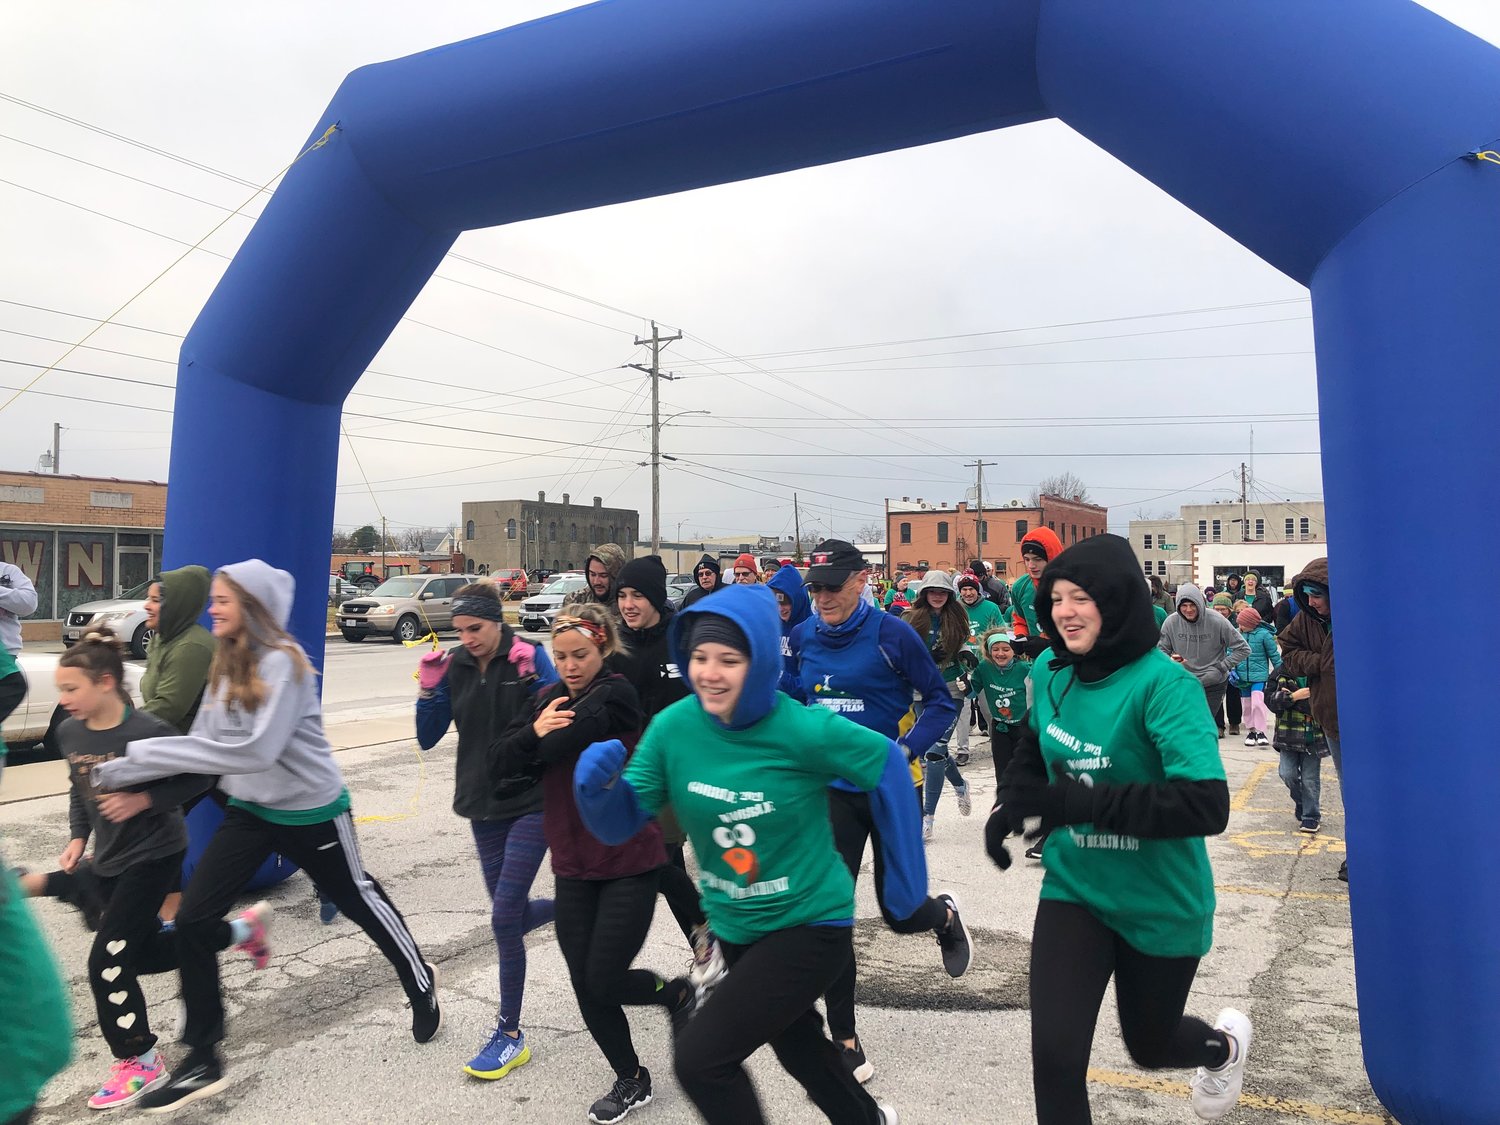 Ready, set, RUN! Webster county residents move their bodies to burn calories and warm up on a chilly Thanksgiving morning.